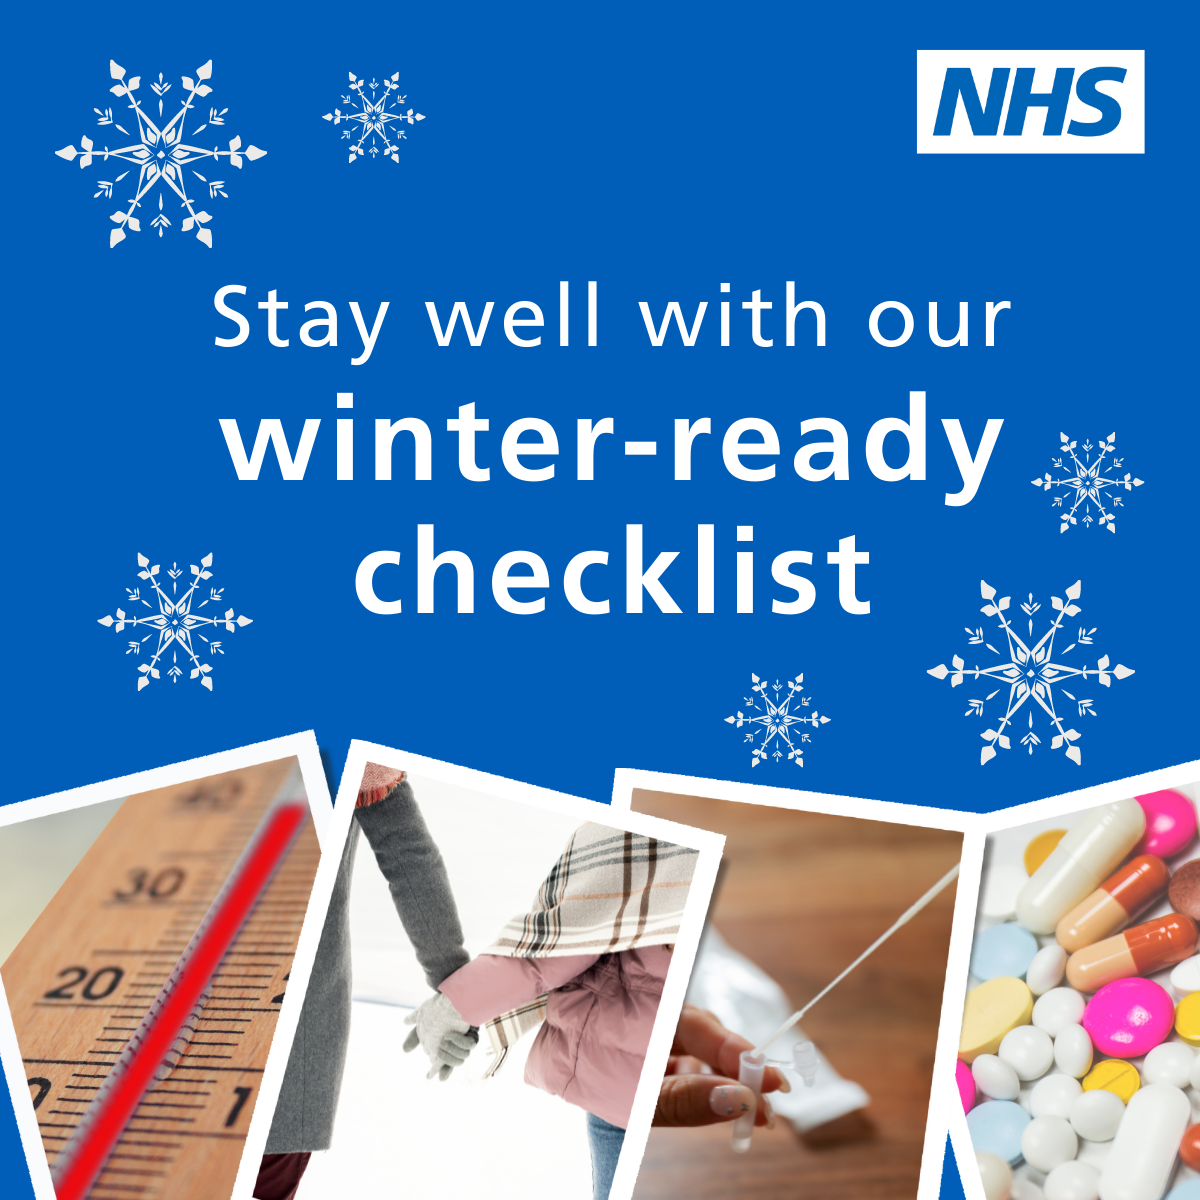 Get ‘Winter Ready’ with new checklist say Sefton health and community leaders